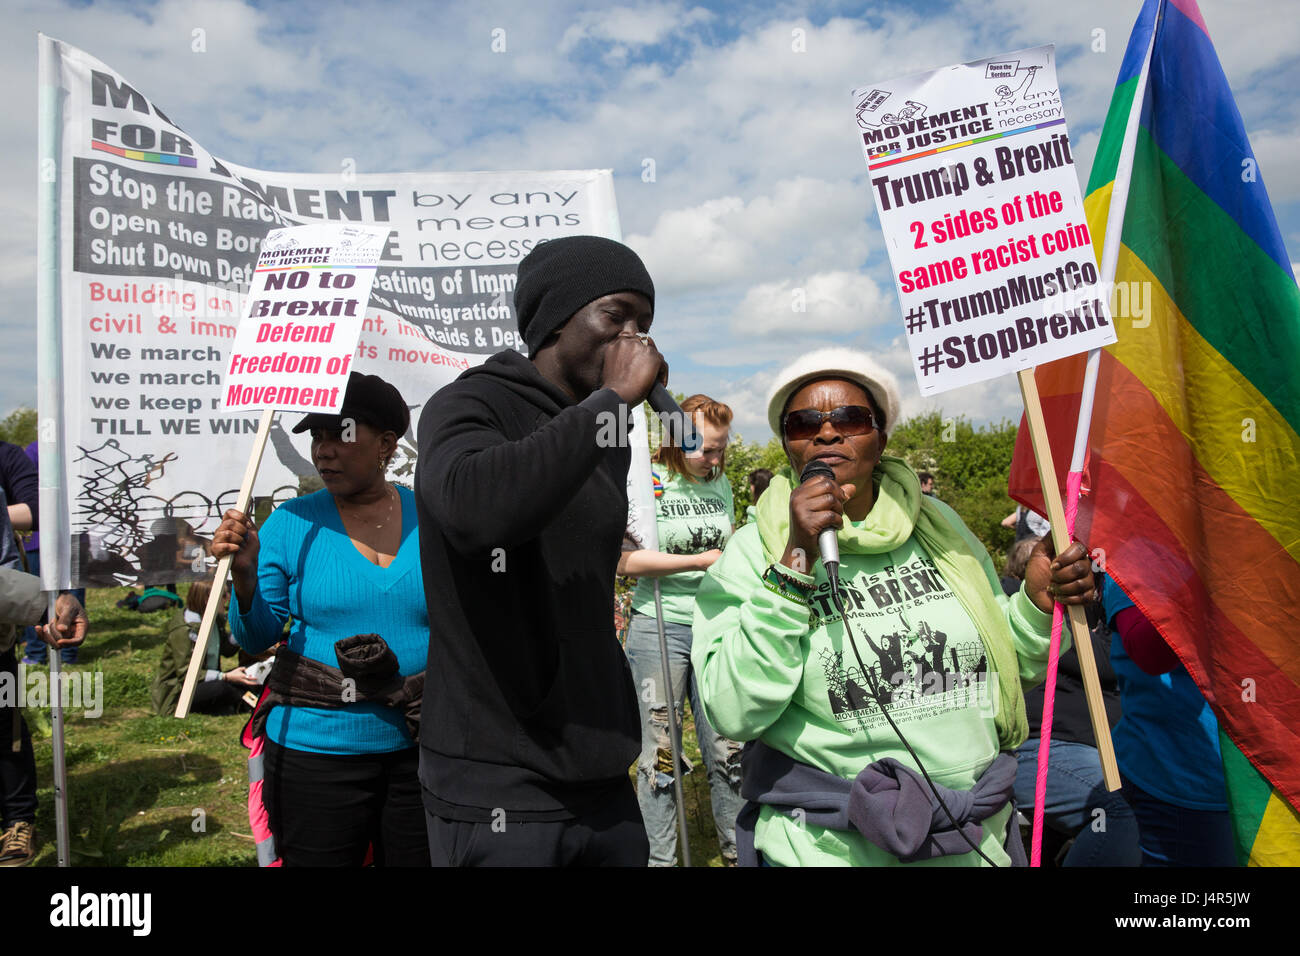 Milton Ernest, UK. 13th May, 2017. Activists from Movement For Justice By Any Means Necessary address a large protest outside Yarl's Wood Immigration Removal Centre to call for all immigration detention centres to be closed. Stock Photo